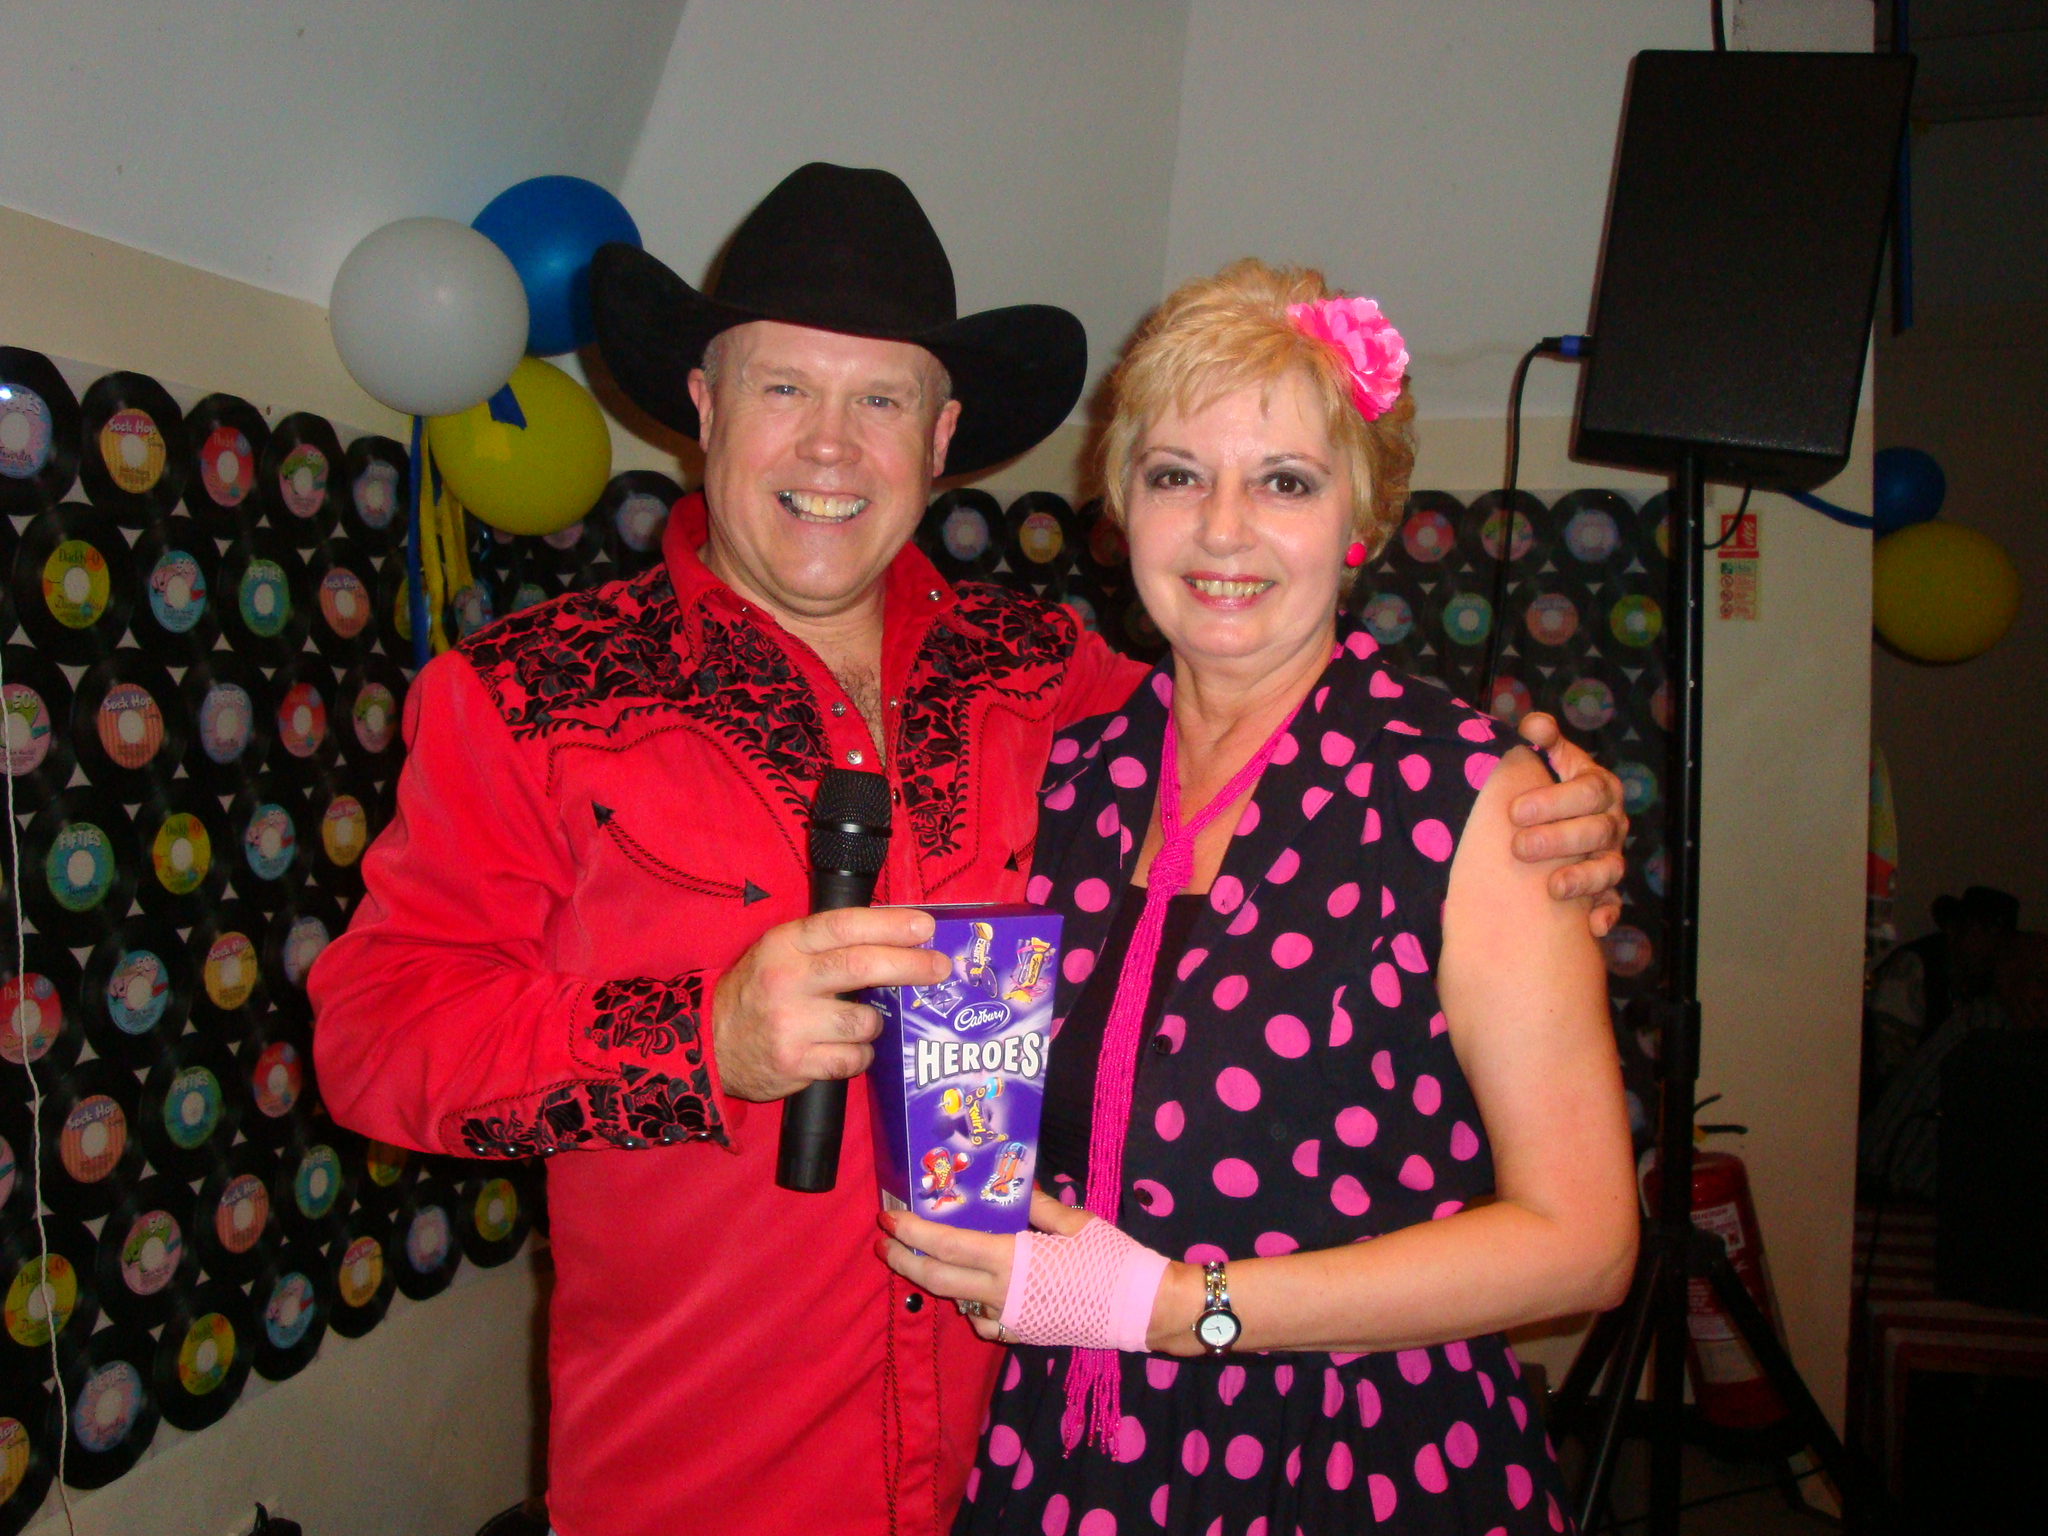 Alan Gregory presenting Sandy with best prize for fancy dress costume - New Year 2011